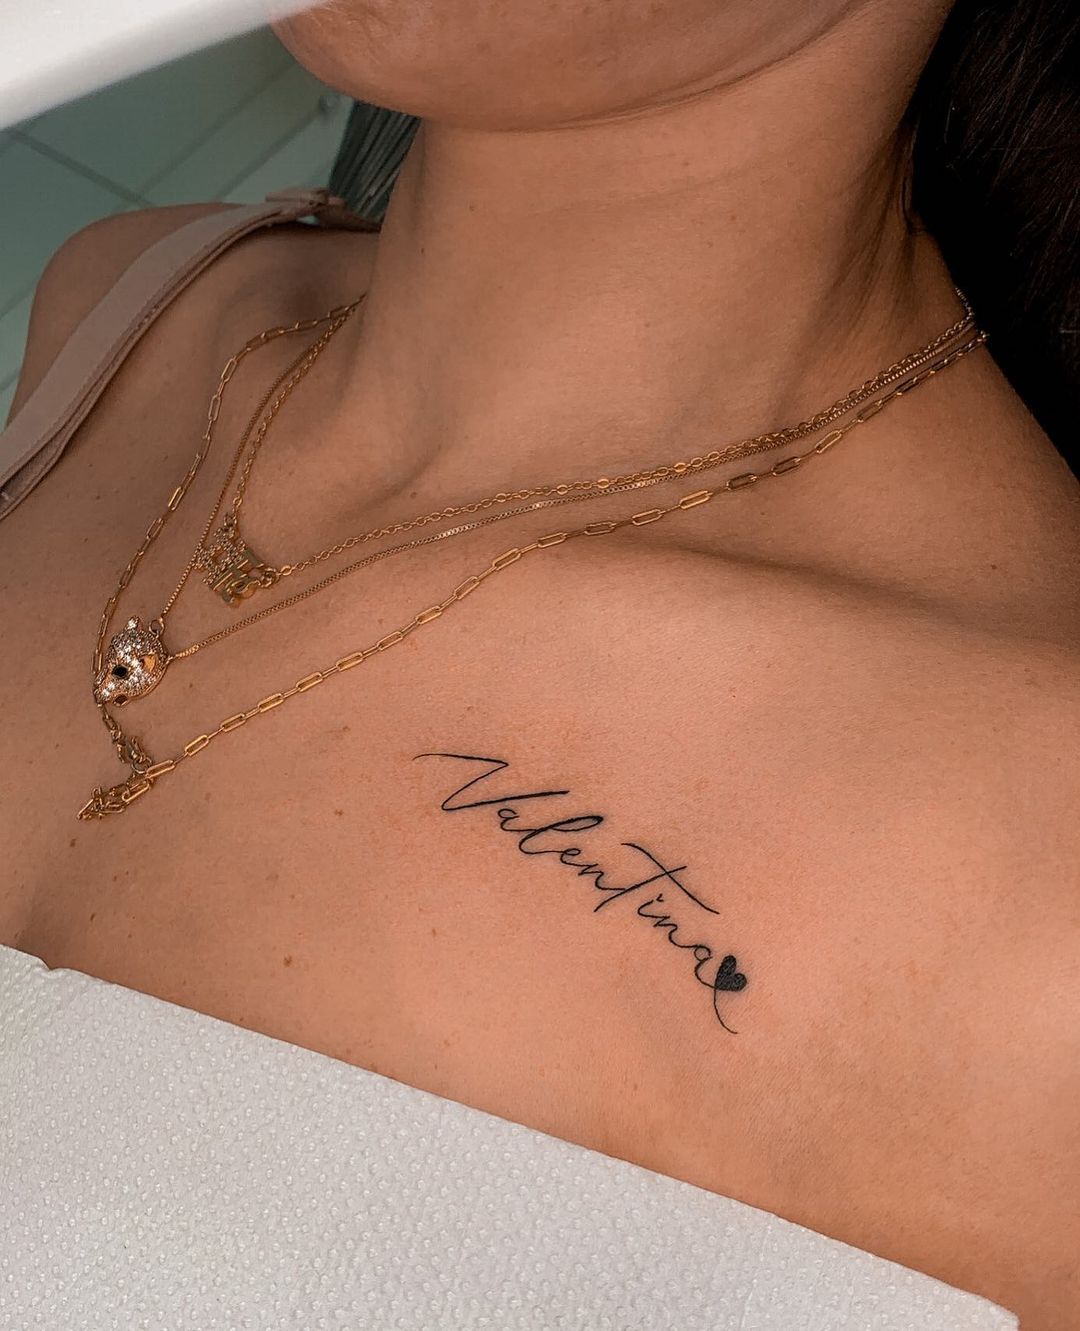 name tattoos on chest for girls